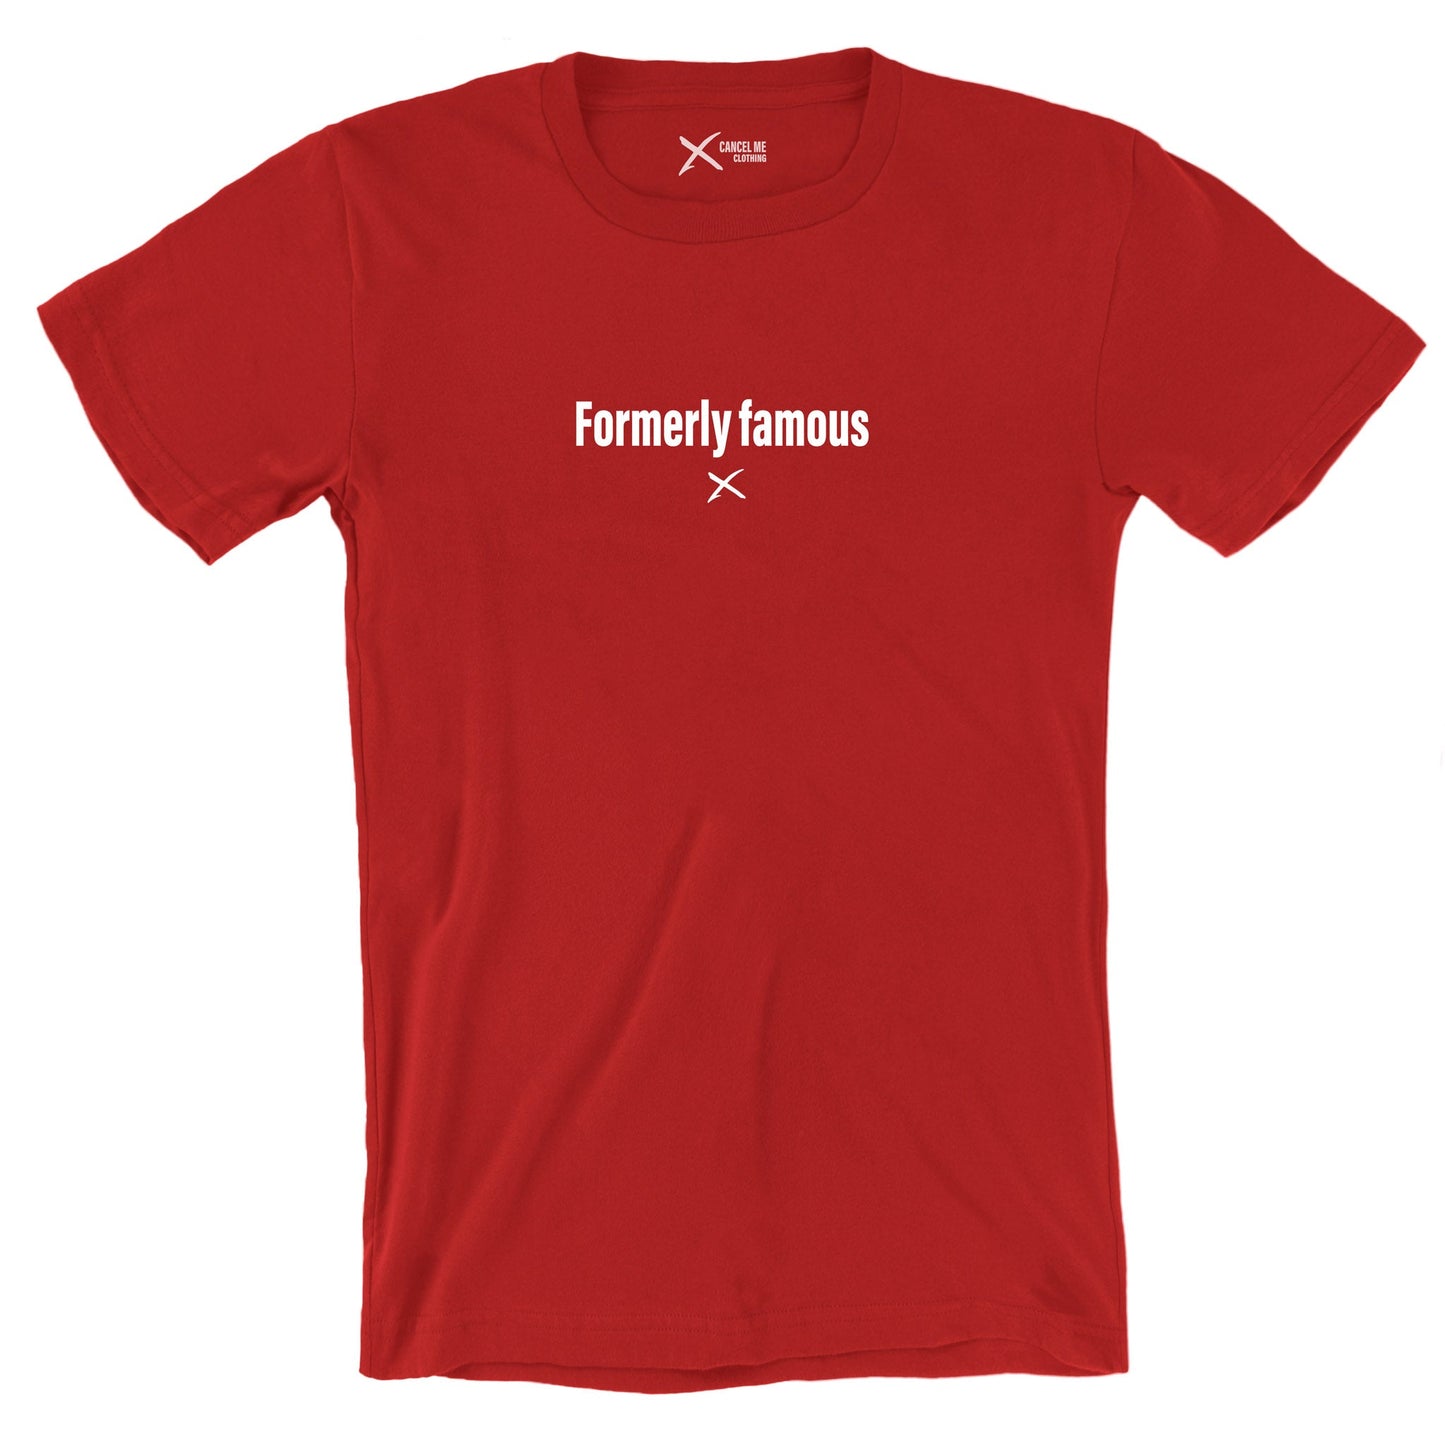 Formerly famous - Shirt